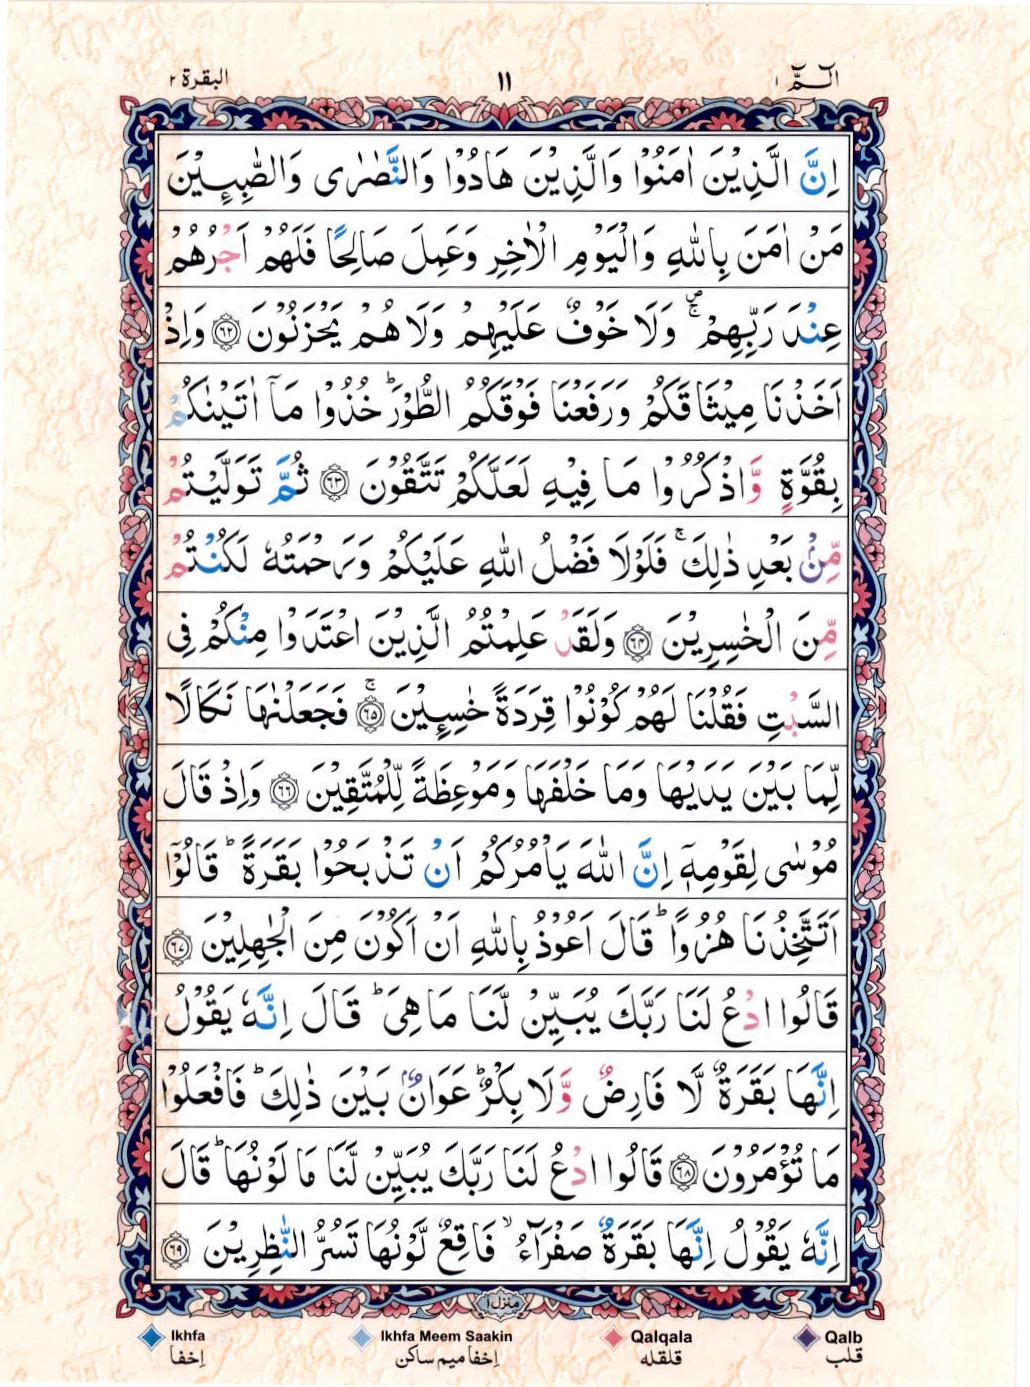 Read 15 Lines Coloured Coded Quran Part 1 Page No 11, Practice Quran